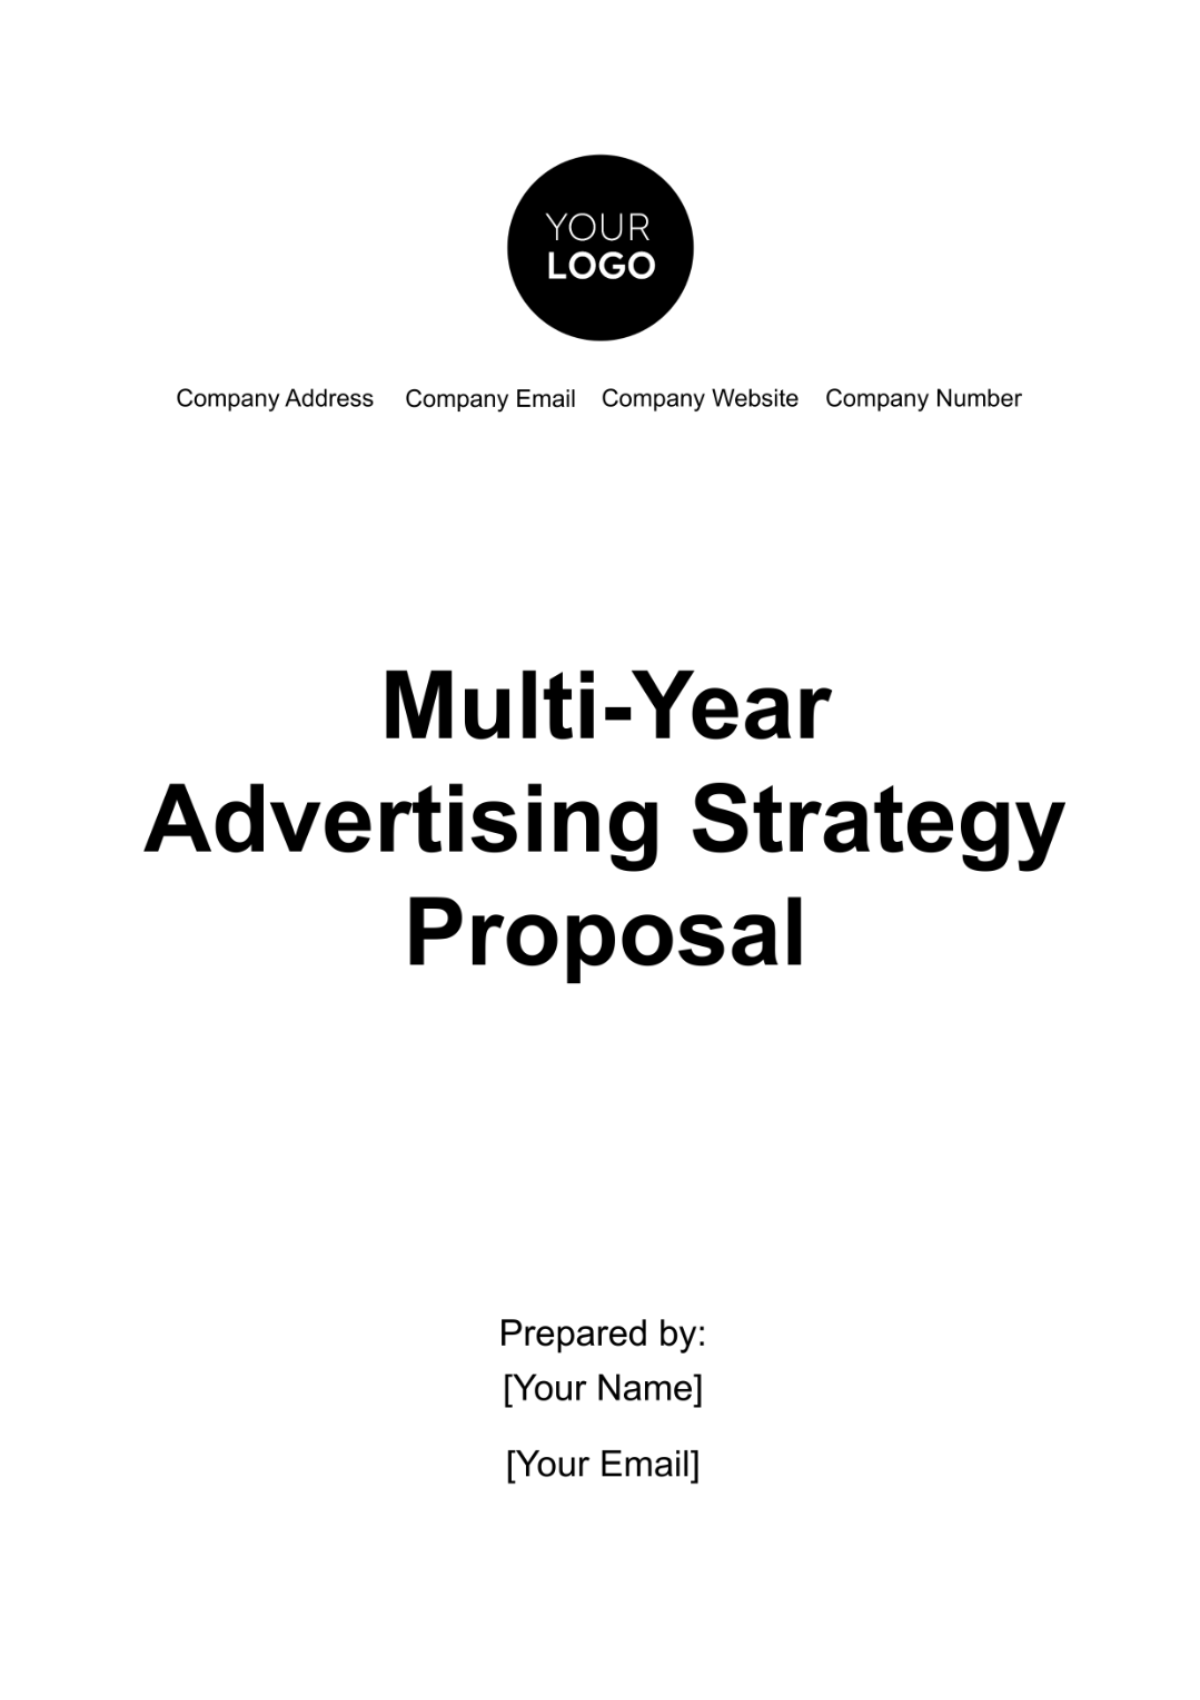 Multi-Year Advertising Strategy Proposal Template